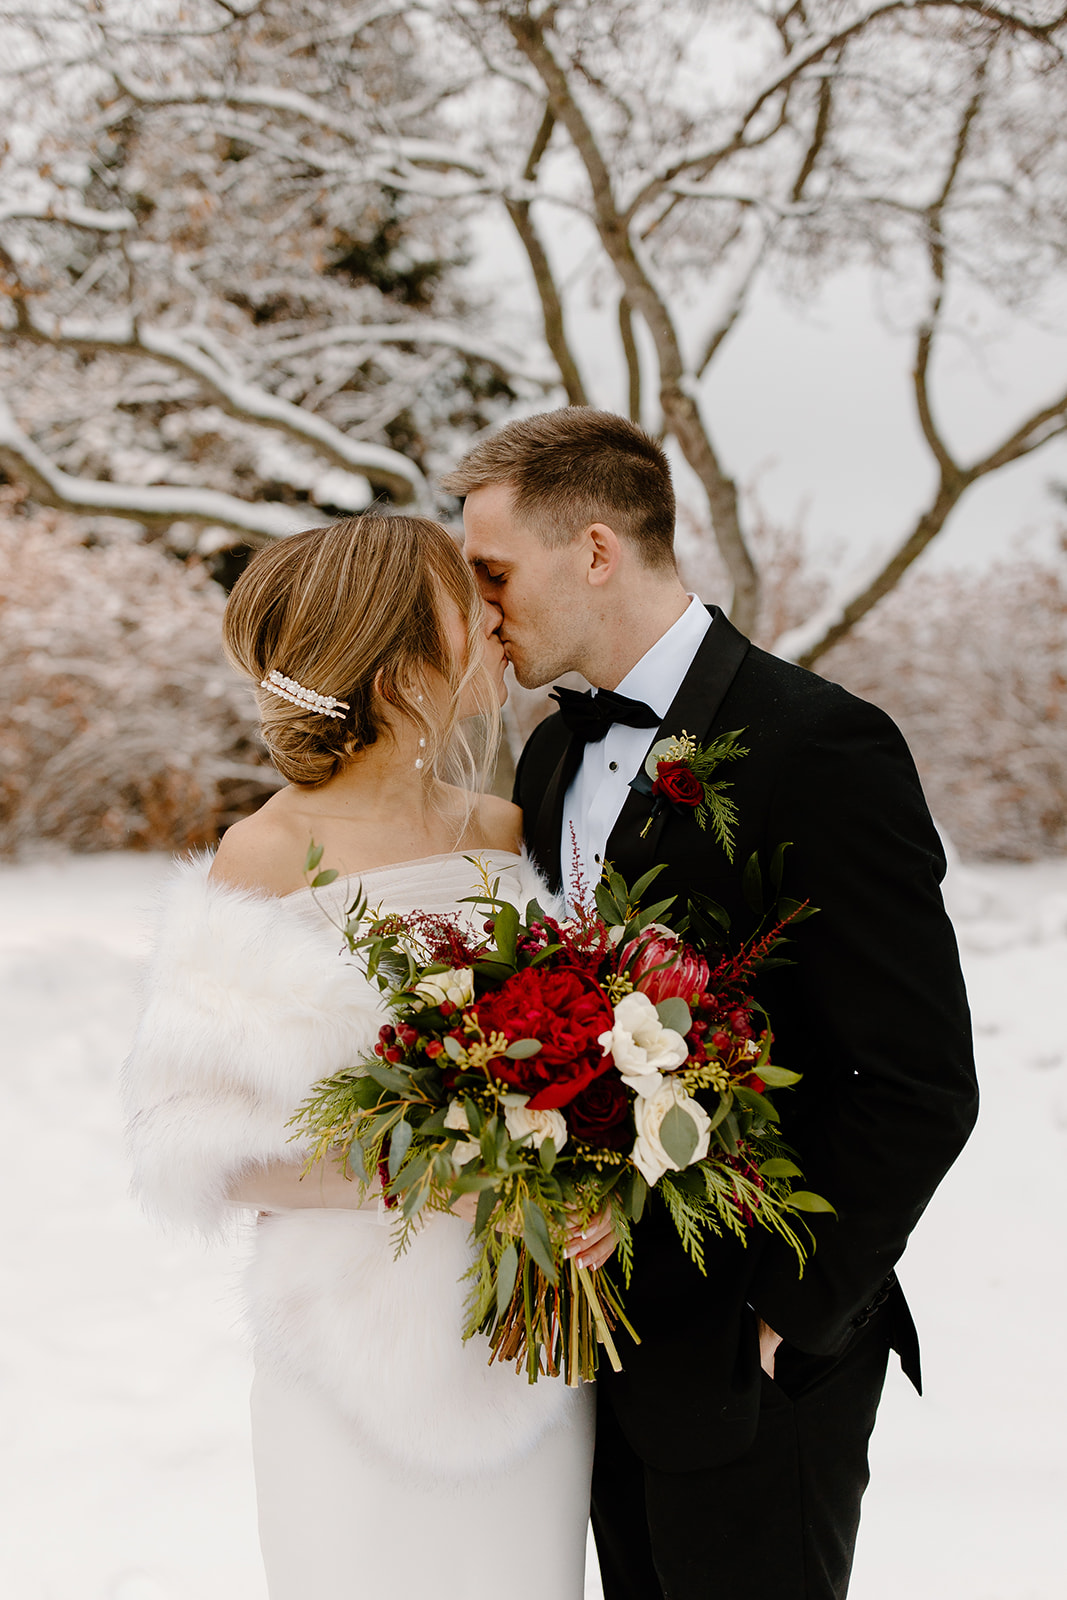 Bride and groom outside in a snowstorm